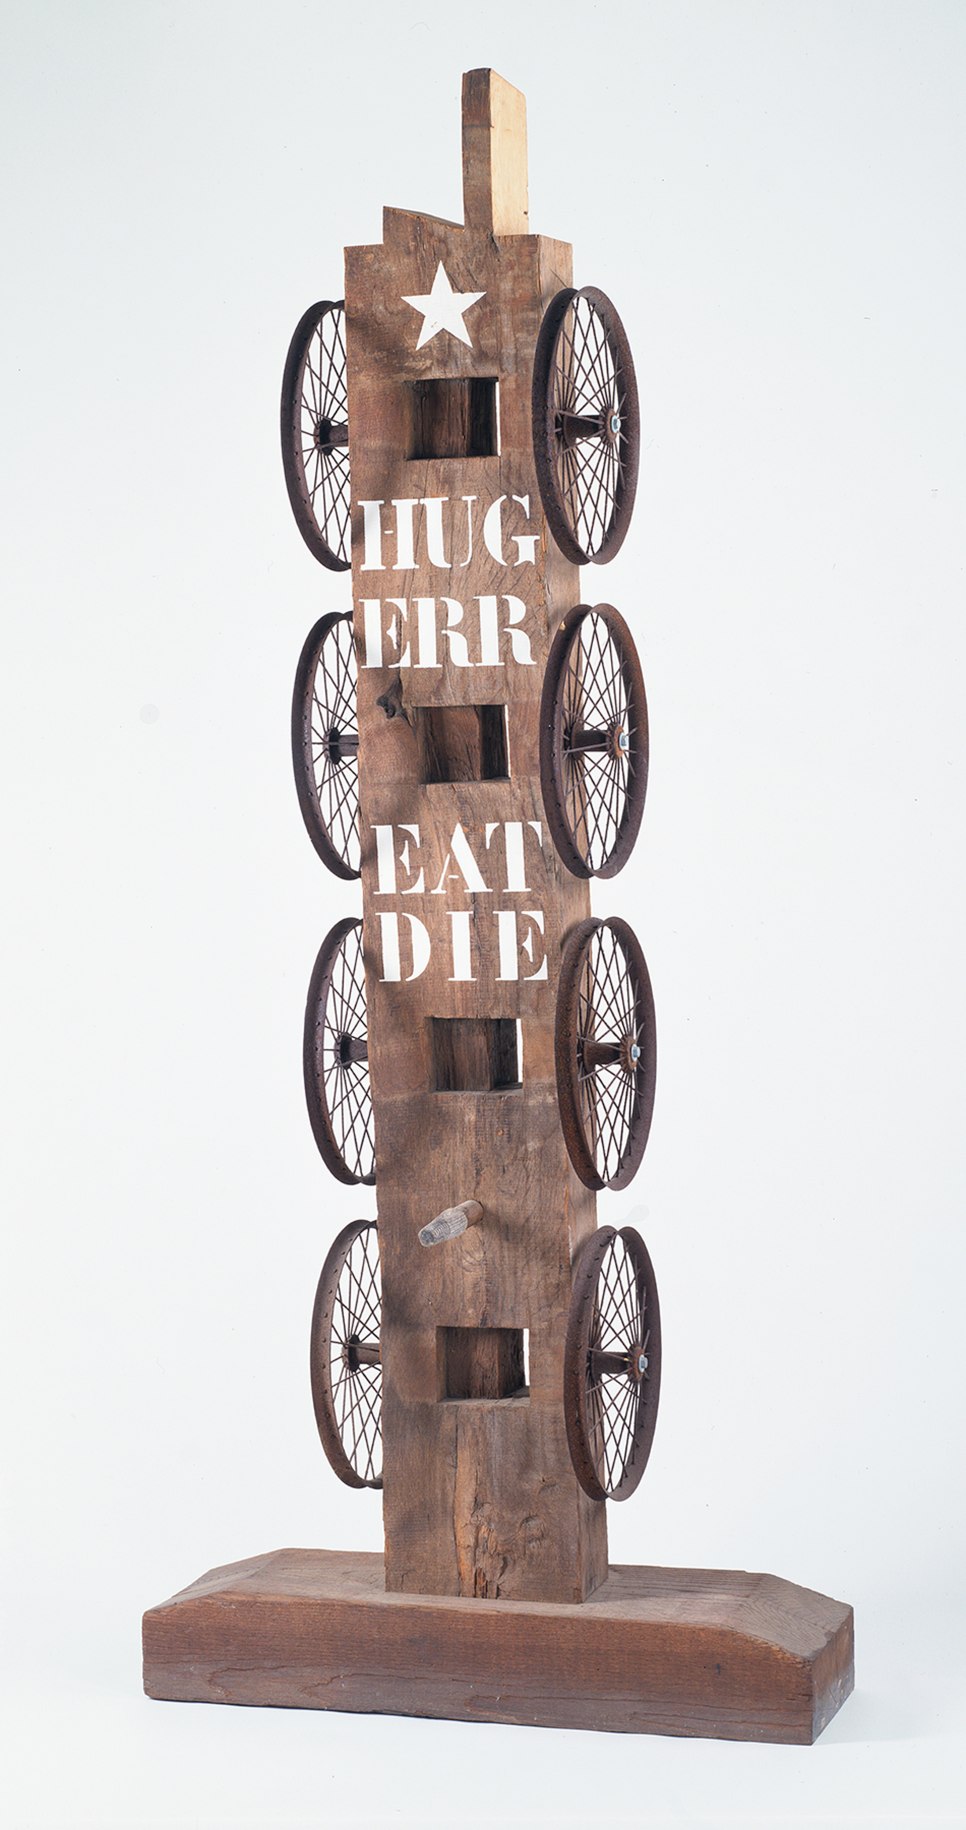 A 84 by 35 1/2 by 17 inch sculpture consisting of a wooden beam with a haunched tenon on a wooden base. Four iron wheels run down the left and right sides of the sculpture. At the front top is a white star, below it the words &quot;Hug,&quot; &quot;Err,&quot; &quot;Eat,&quot; and &quot;Die&quot; are painted in white stenciled letters.